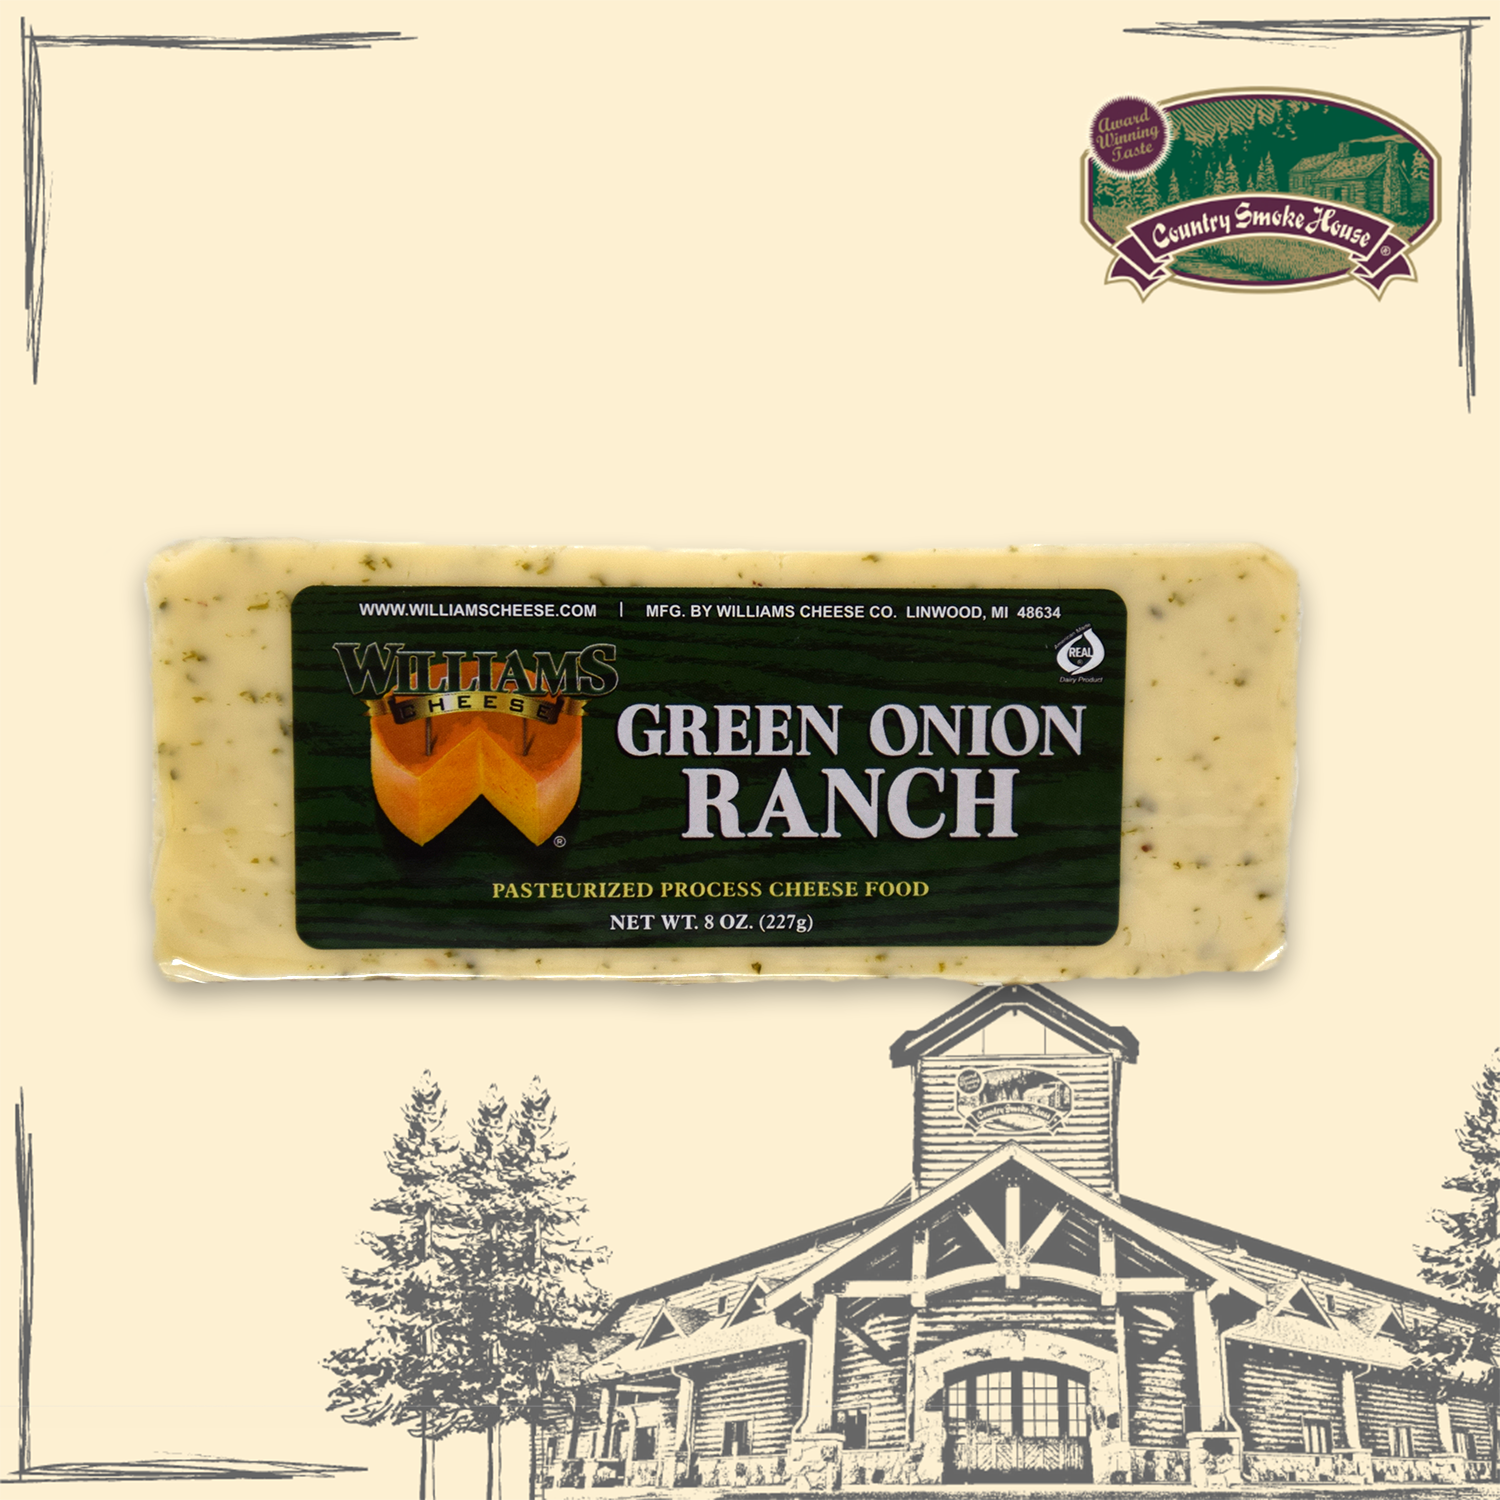 William's Green Onion Ranch Cheese